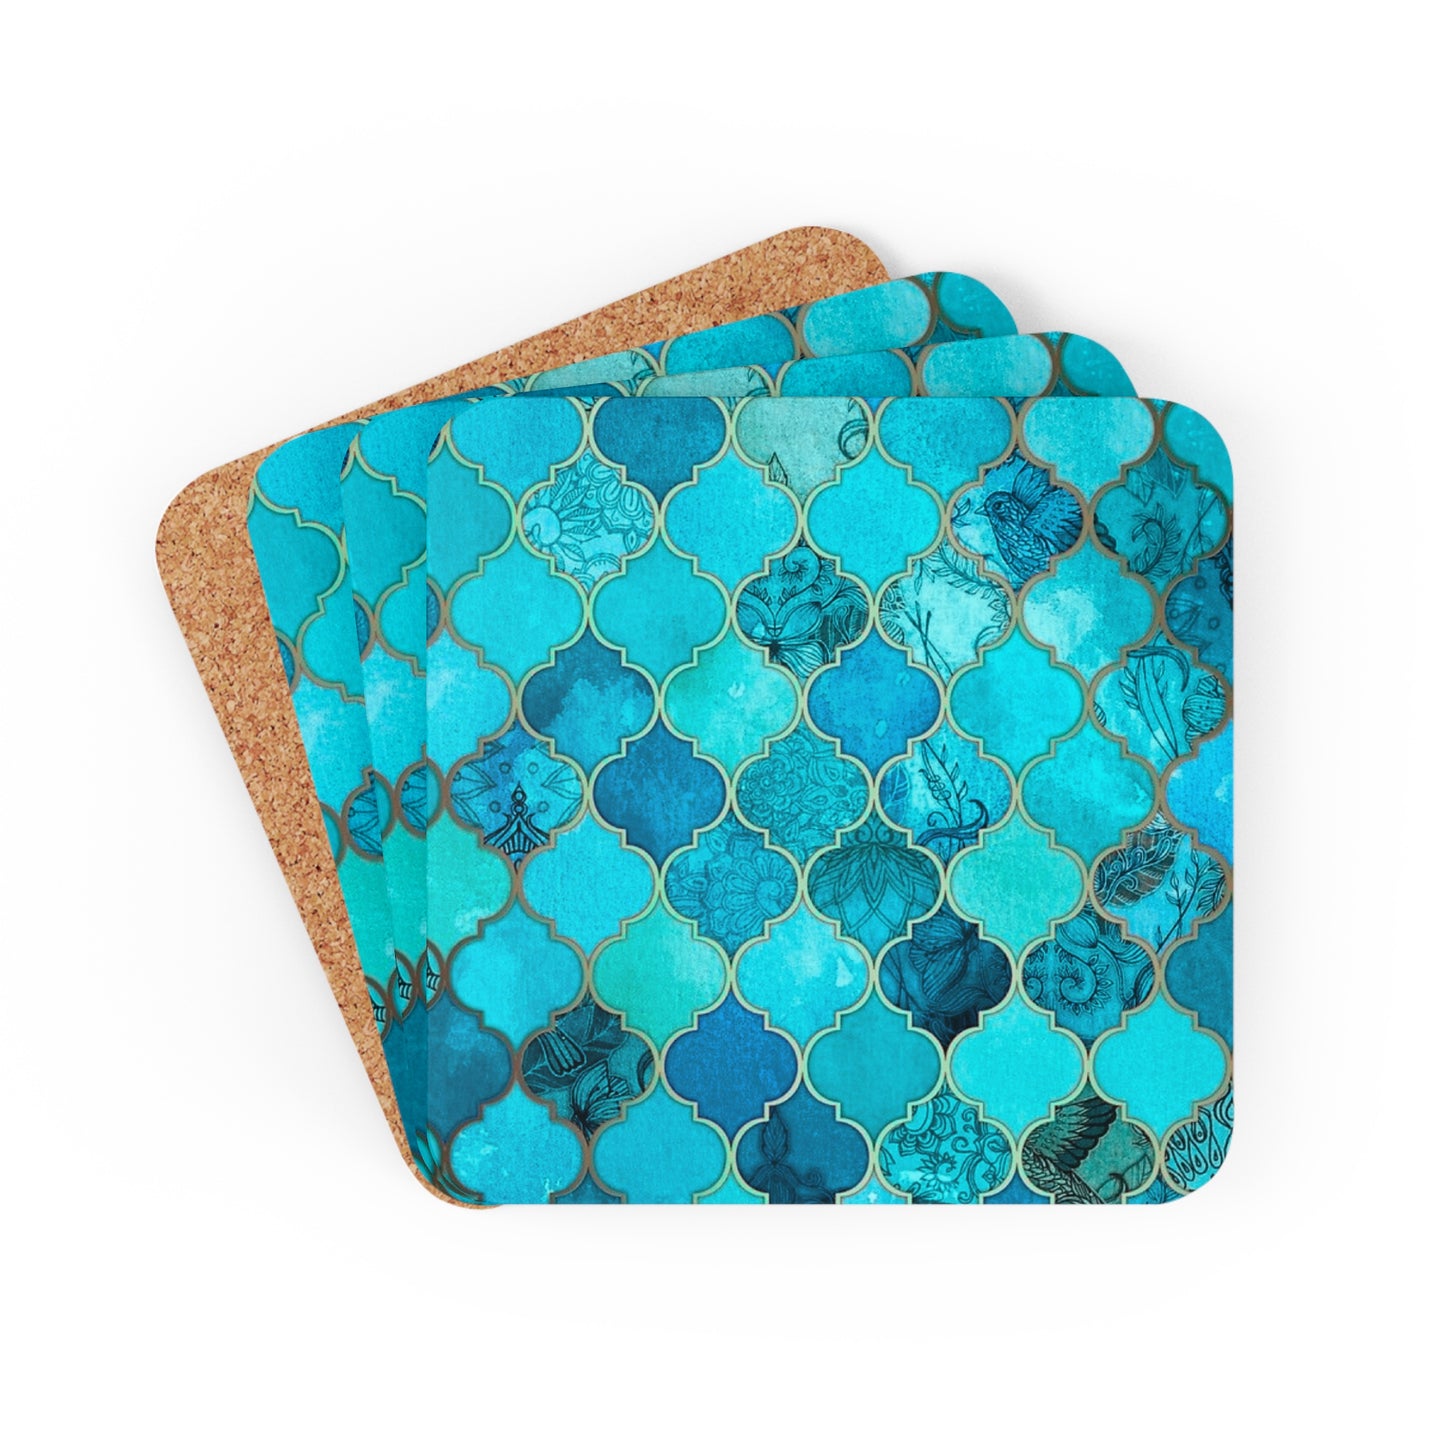 Teal and Turquoise Arabesque Tile Marrakech Moroccan Holiday Christmas Entertaining Corkwood Coaster Set